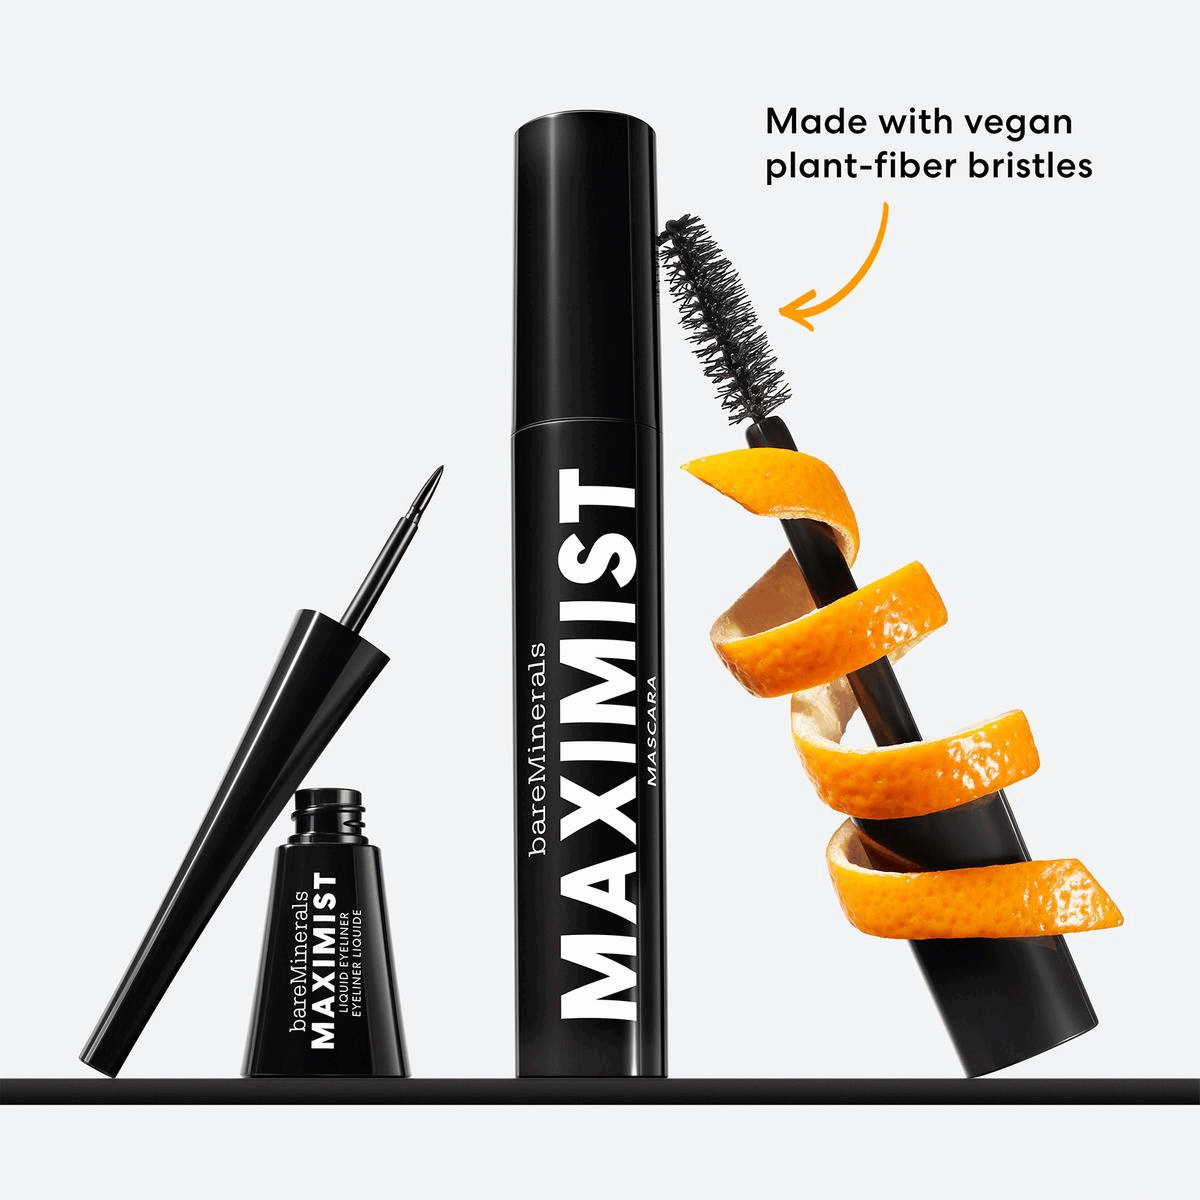 Image 1, made with vegan plant-fiber bristles. Image 2, dual reservoirs load mascara for instant max volume. made with vegan plant-fiber bristles. Image 3, available in 2 sizes, full and mini